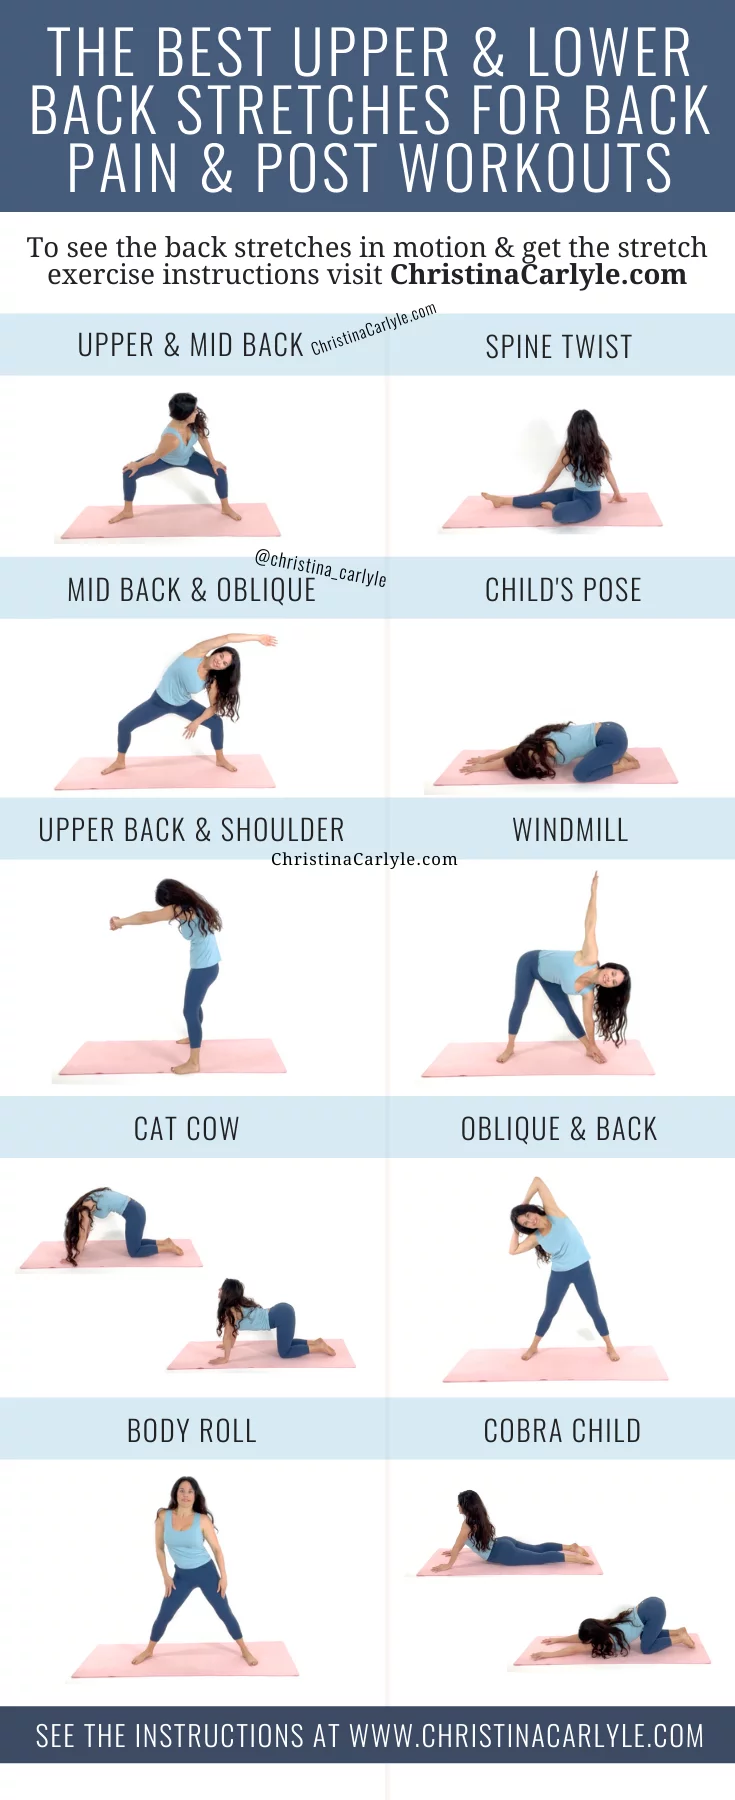 Hot Yoga Athlone - Stretching Pose - A forward bend with an anterior tilt  on the pelvis creating a lengthening stretch of the front and back of the  spine, working eventually into